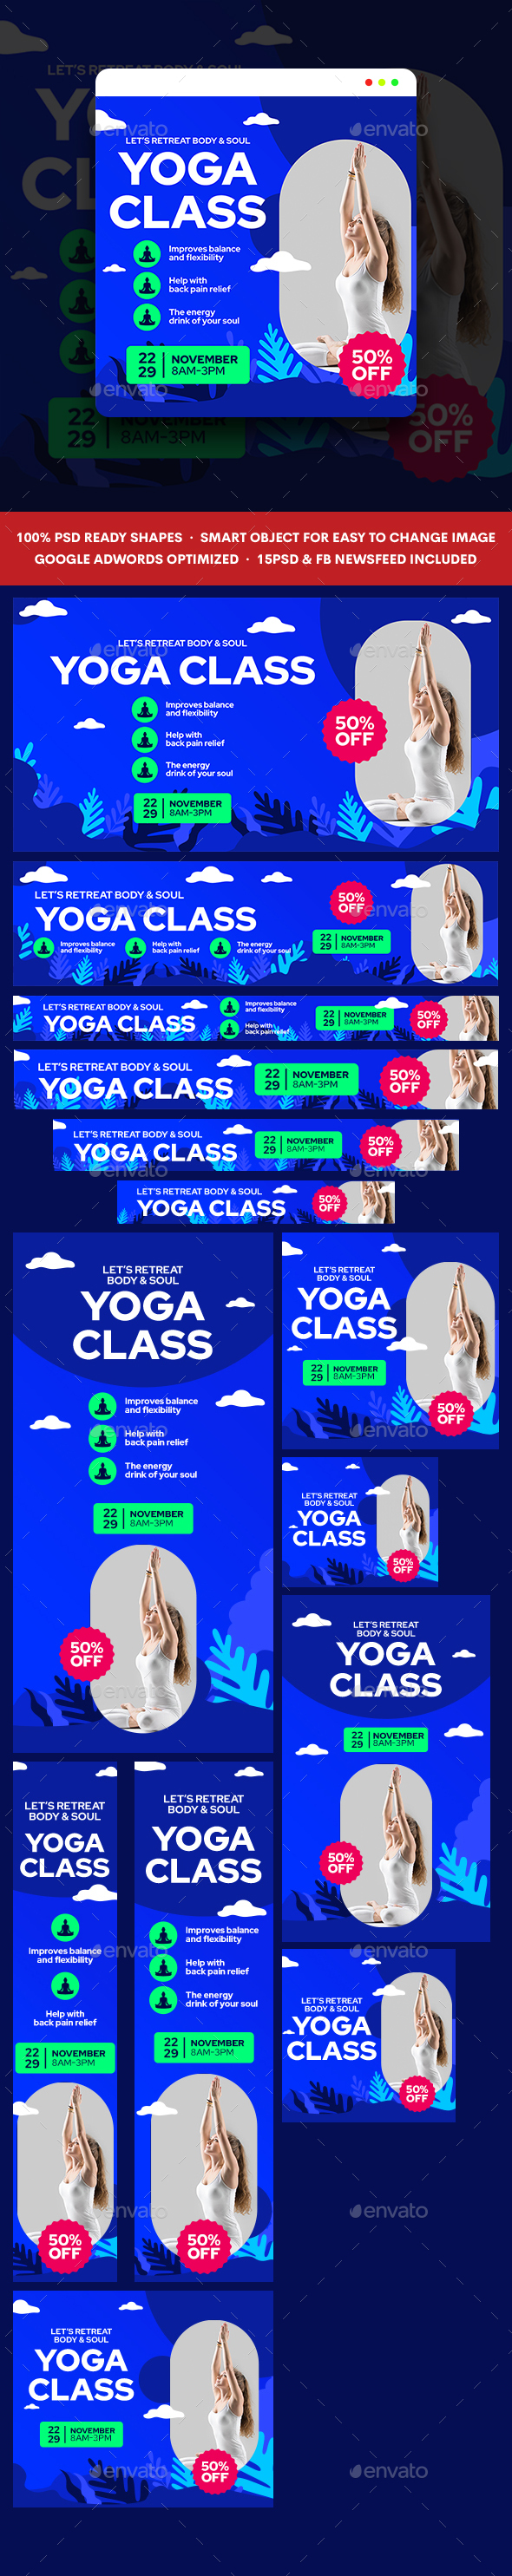 Yoga and Lifestyle Banner Ad